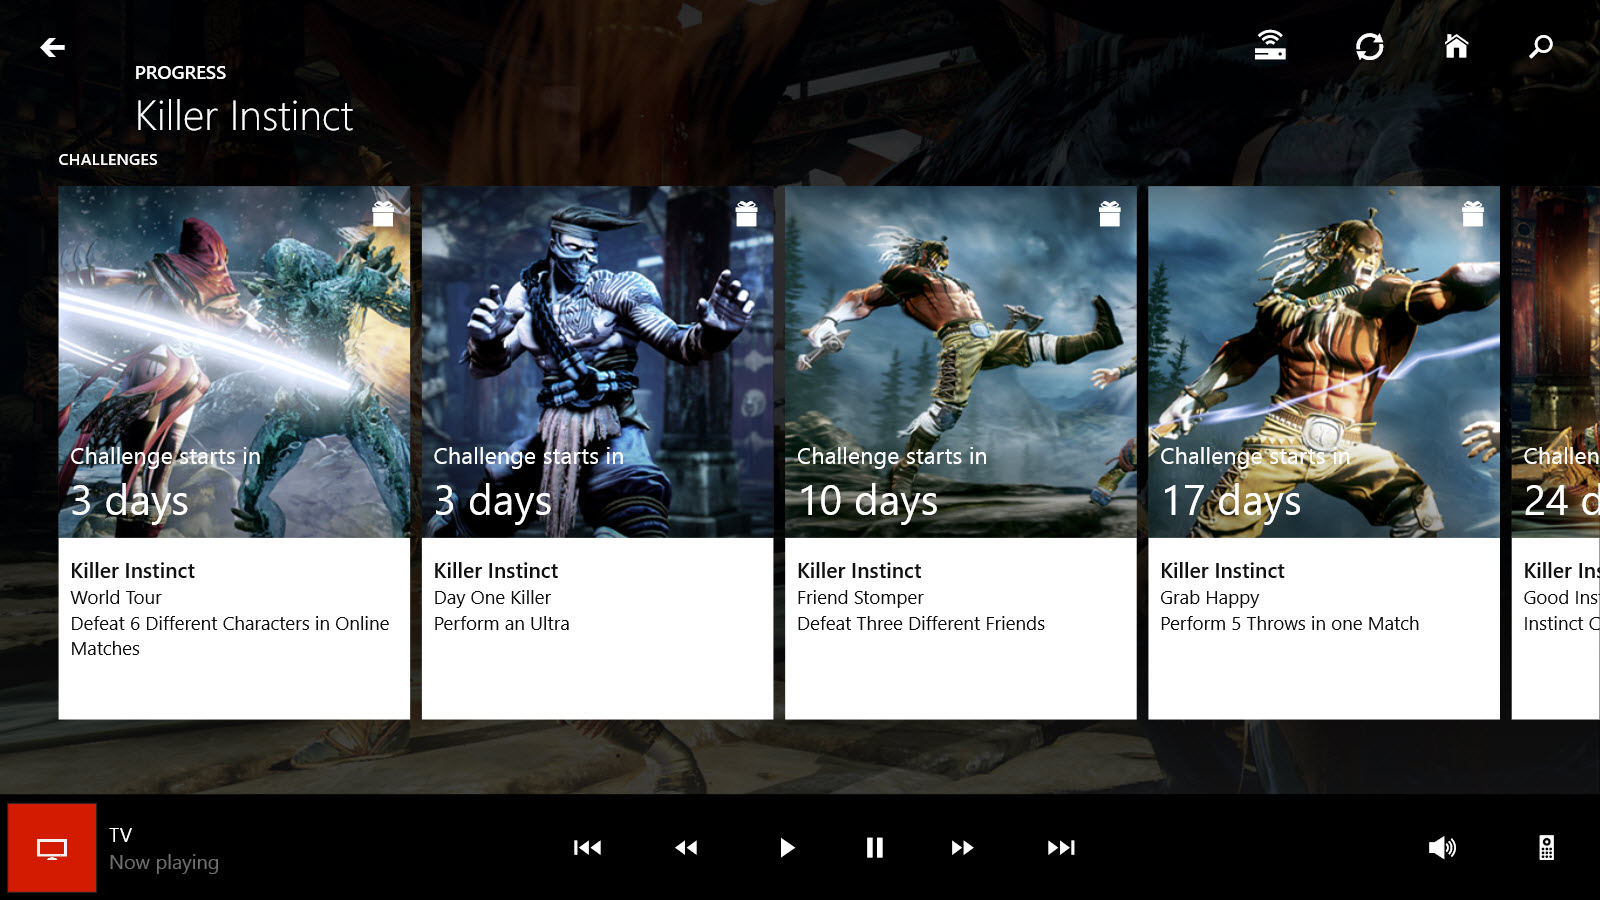 How To Download Movies To Xbox One